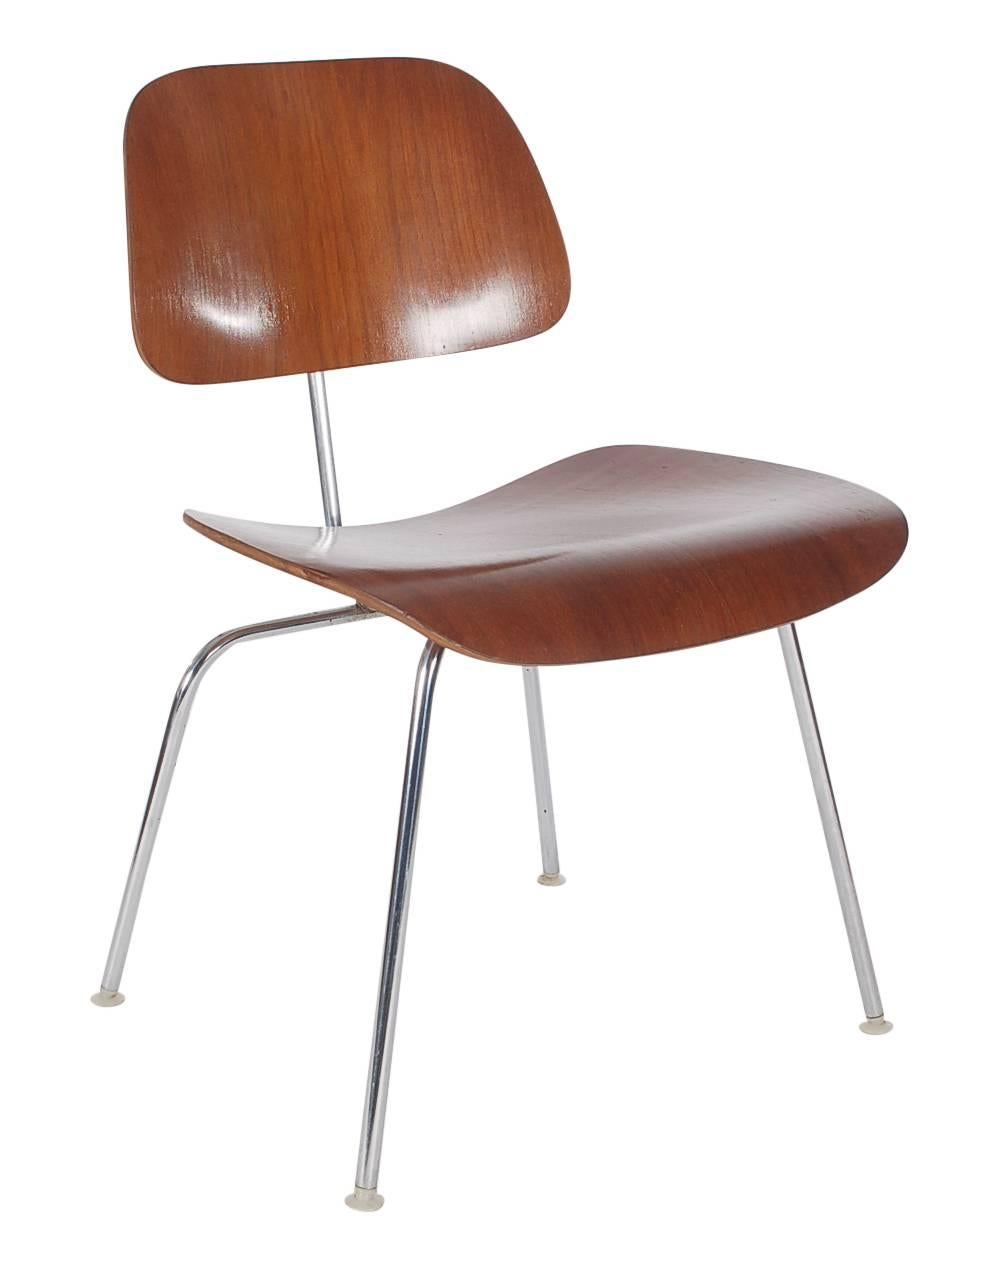 An iconic plywood chair designed by the great Charles Eames for Herman Miller. This chair features ash plywood seat and back with steel framing. All original, nice early example.